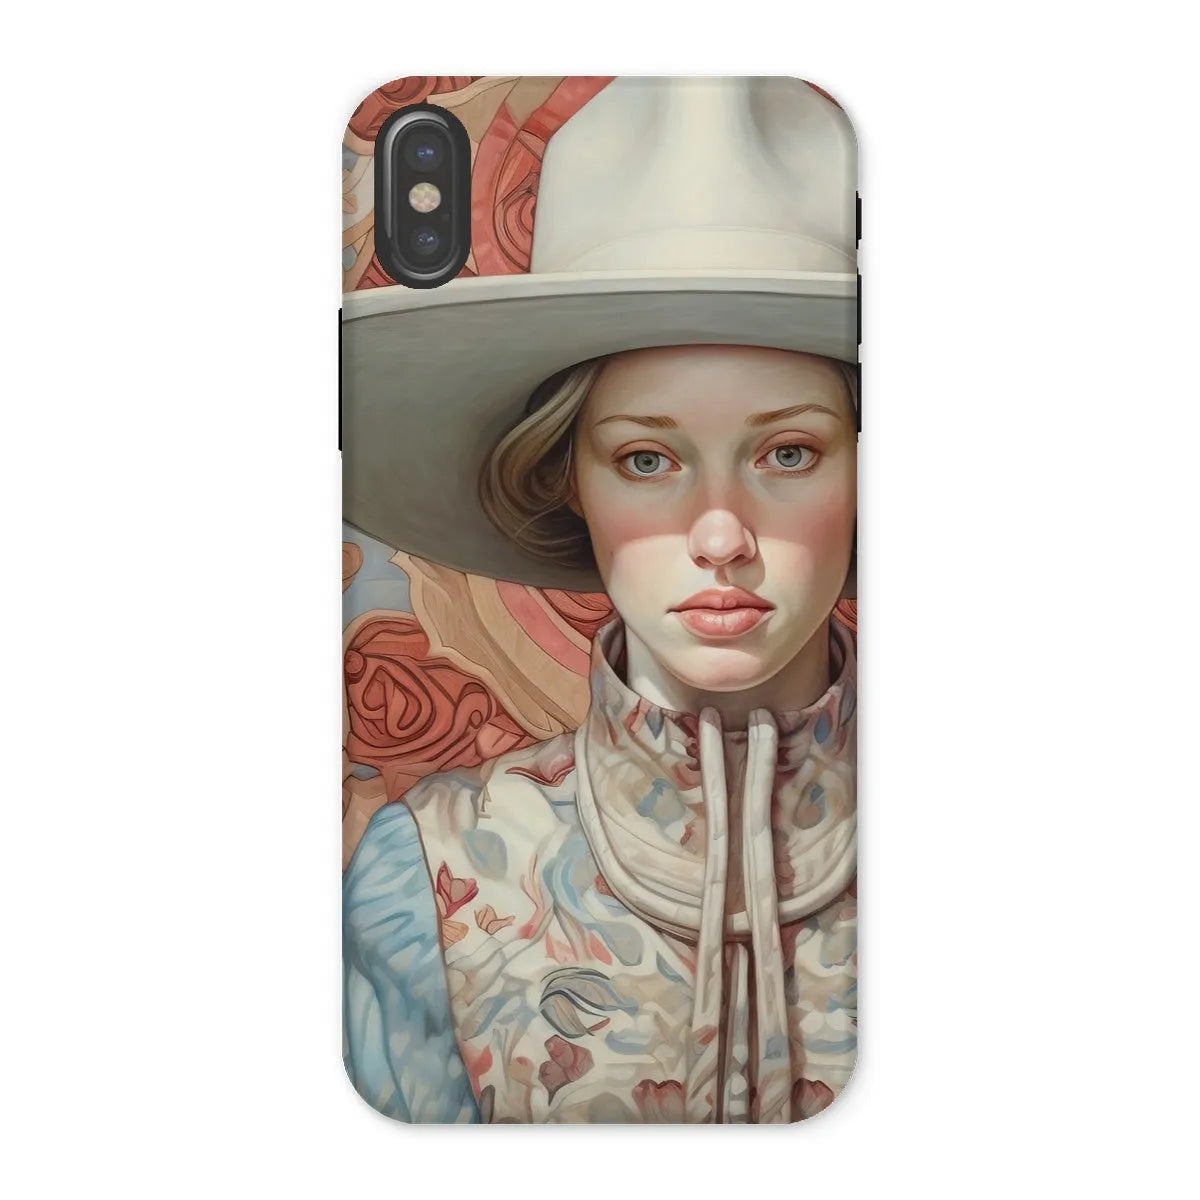 Lottie The Lesbian Cowgirl - Sapphic Art Phone Case - Iphone x / Matte - Mobile Phone Cases - Aesthetic Art